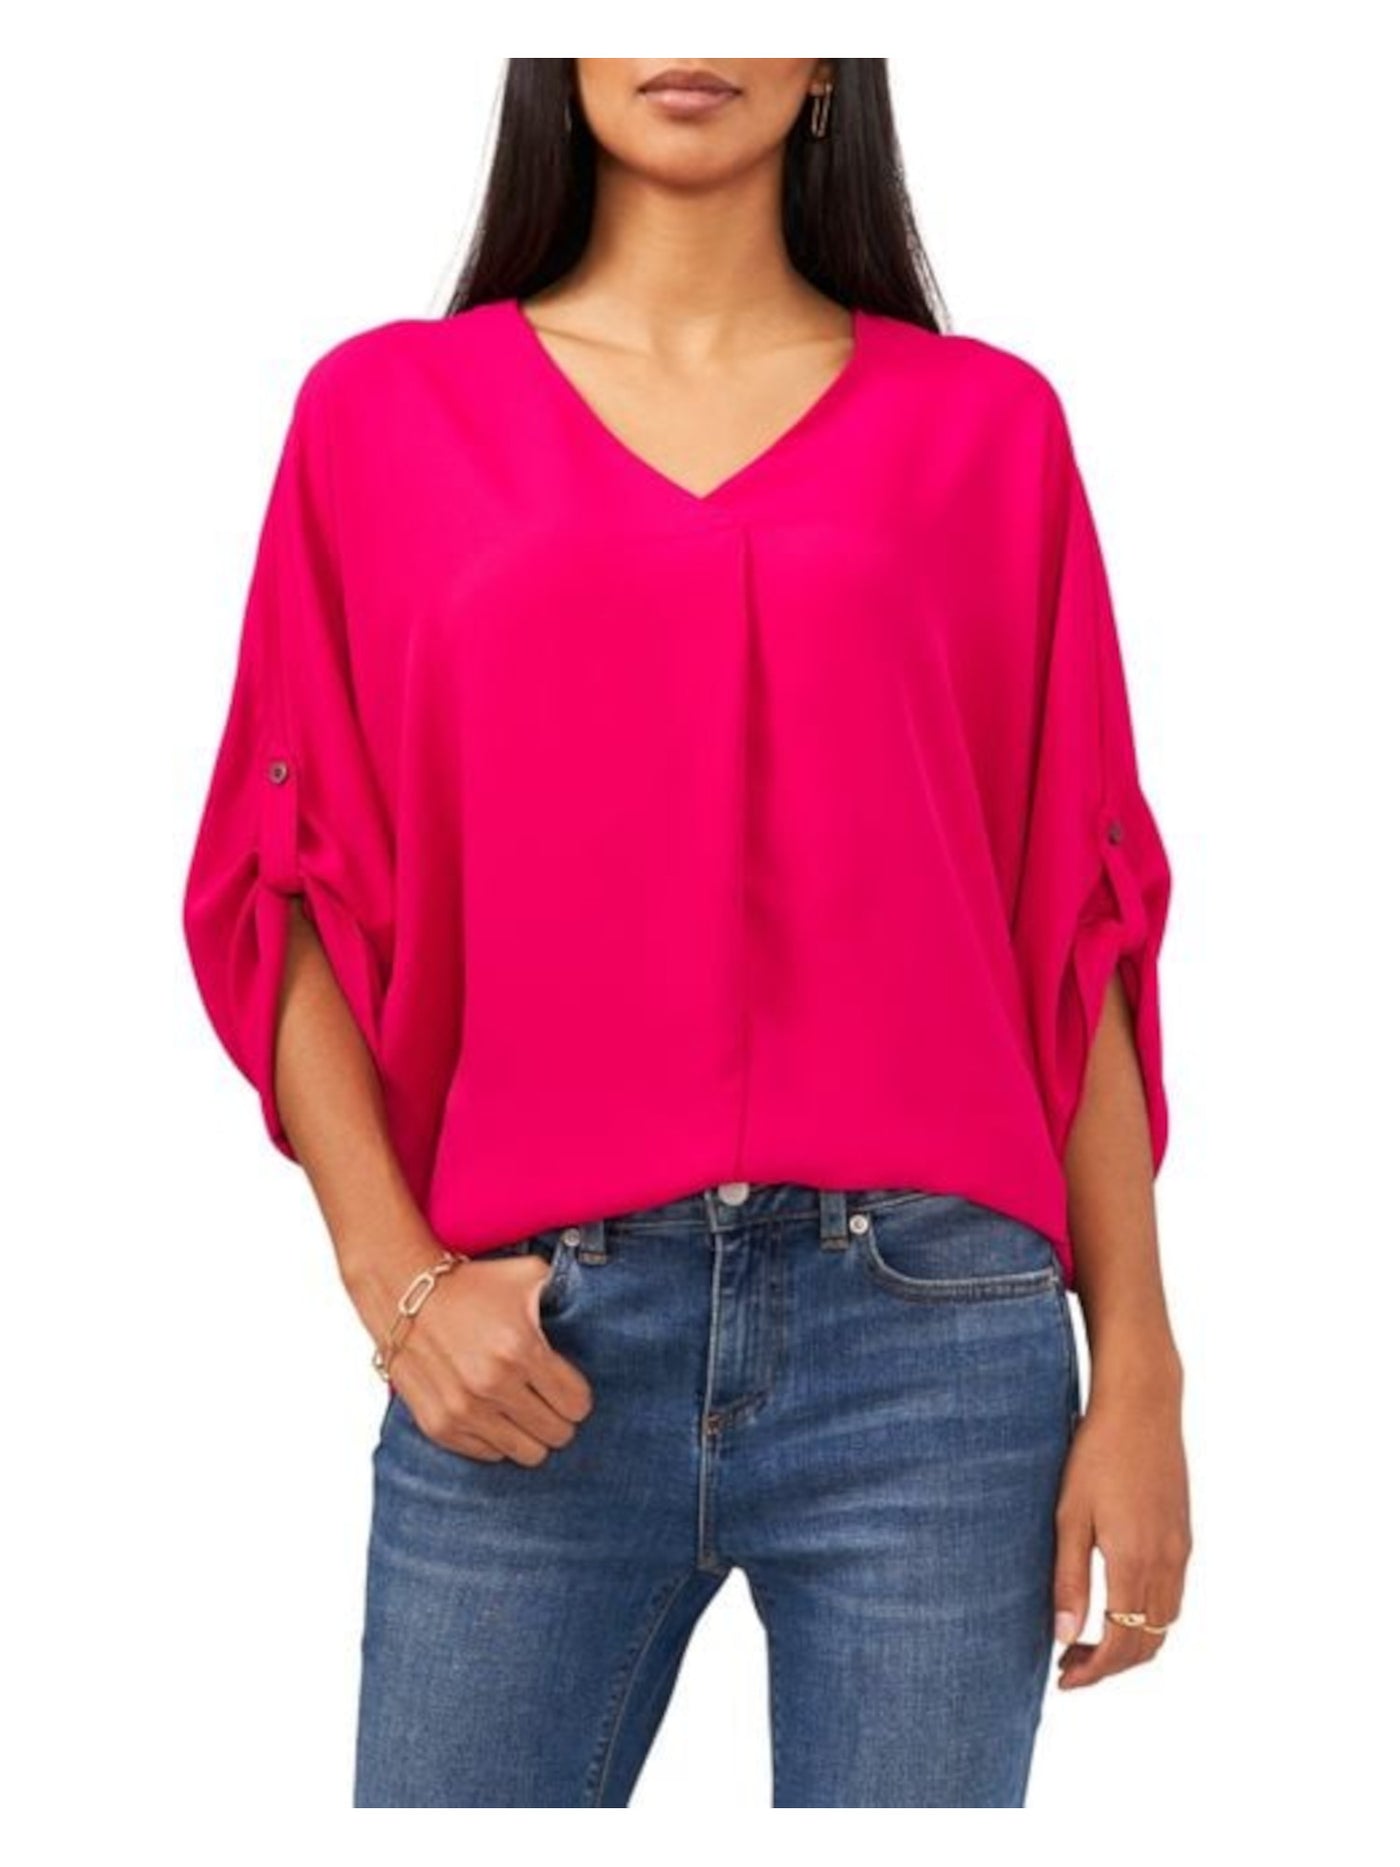 VINCE CAMUTO Womens Pink Pleated Sheer Roll Tab Pullover Vented Hem Dolman Sleeve V Neck Blouse L